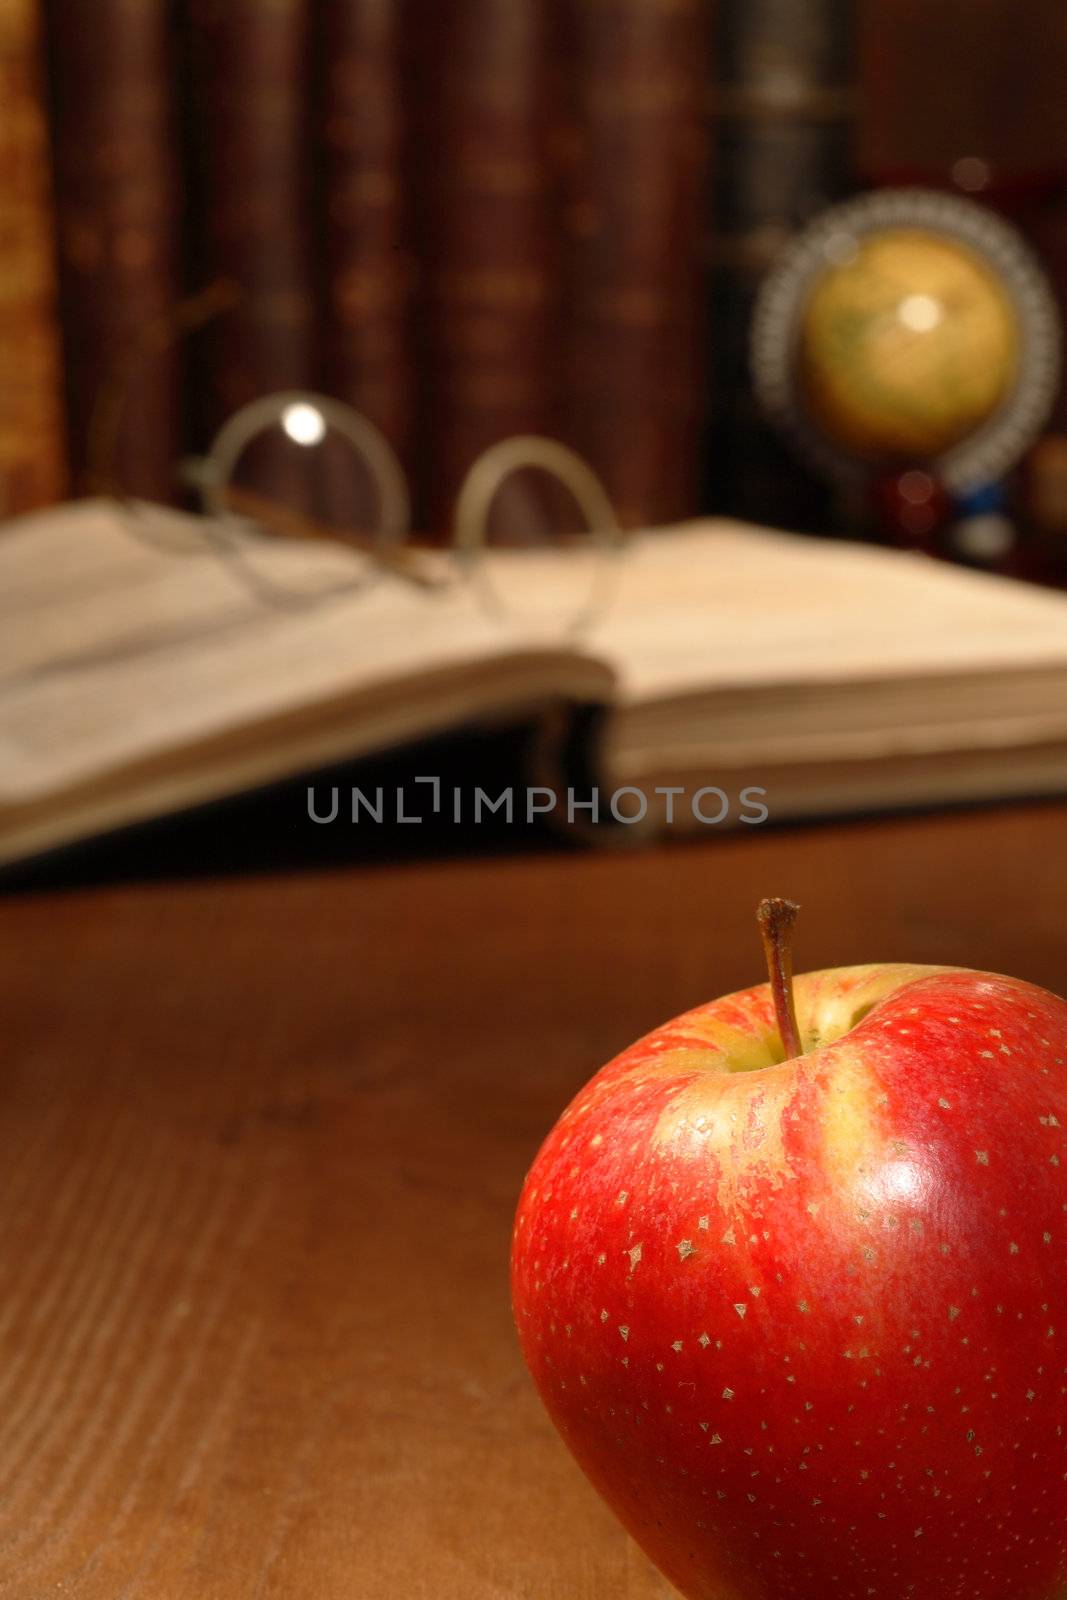 Closeup of red apple lying on wooden table with old books and spectacles